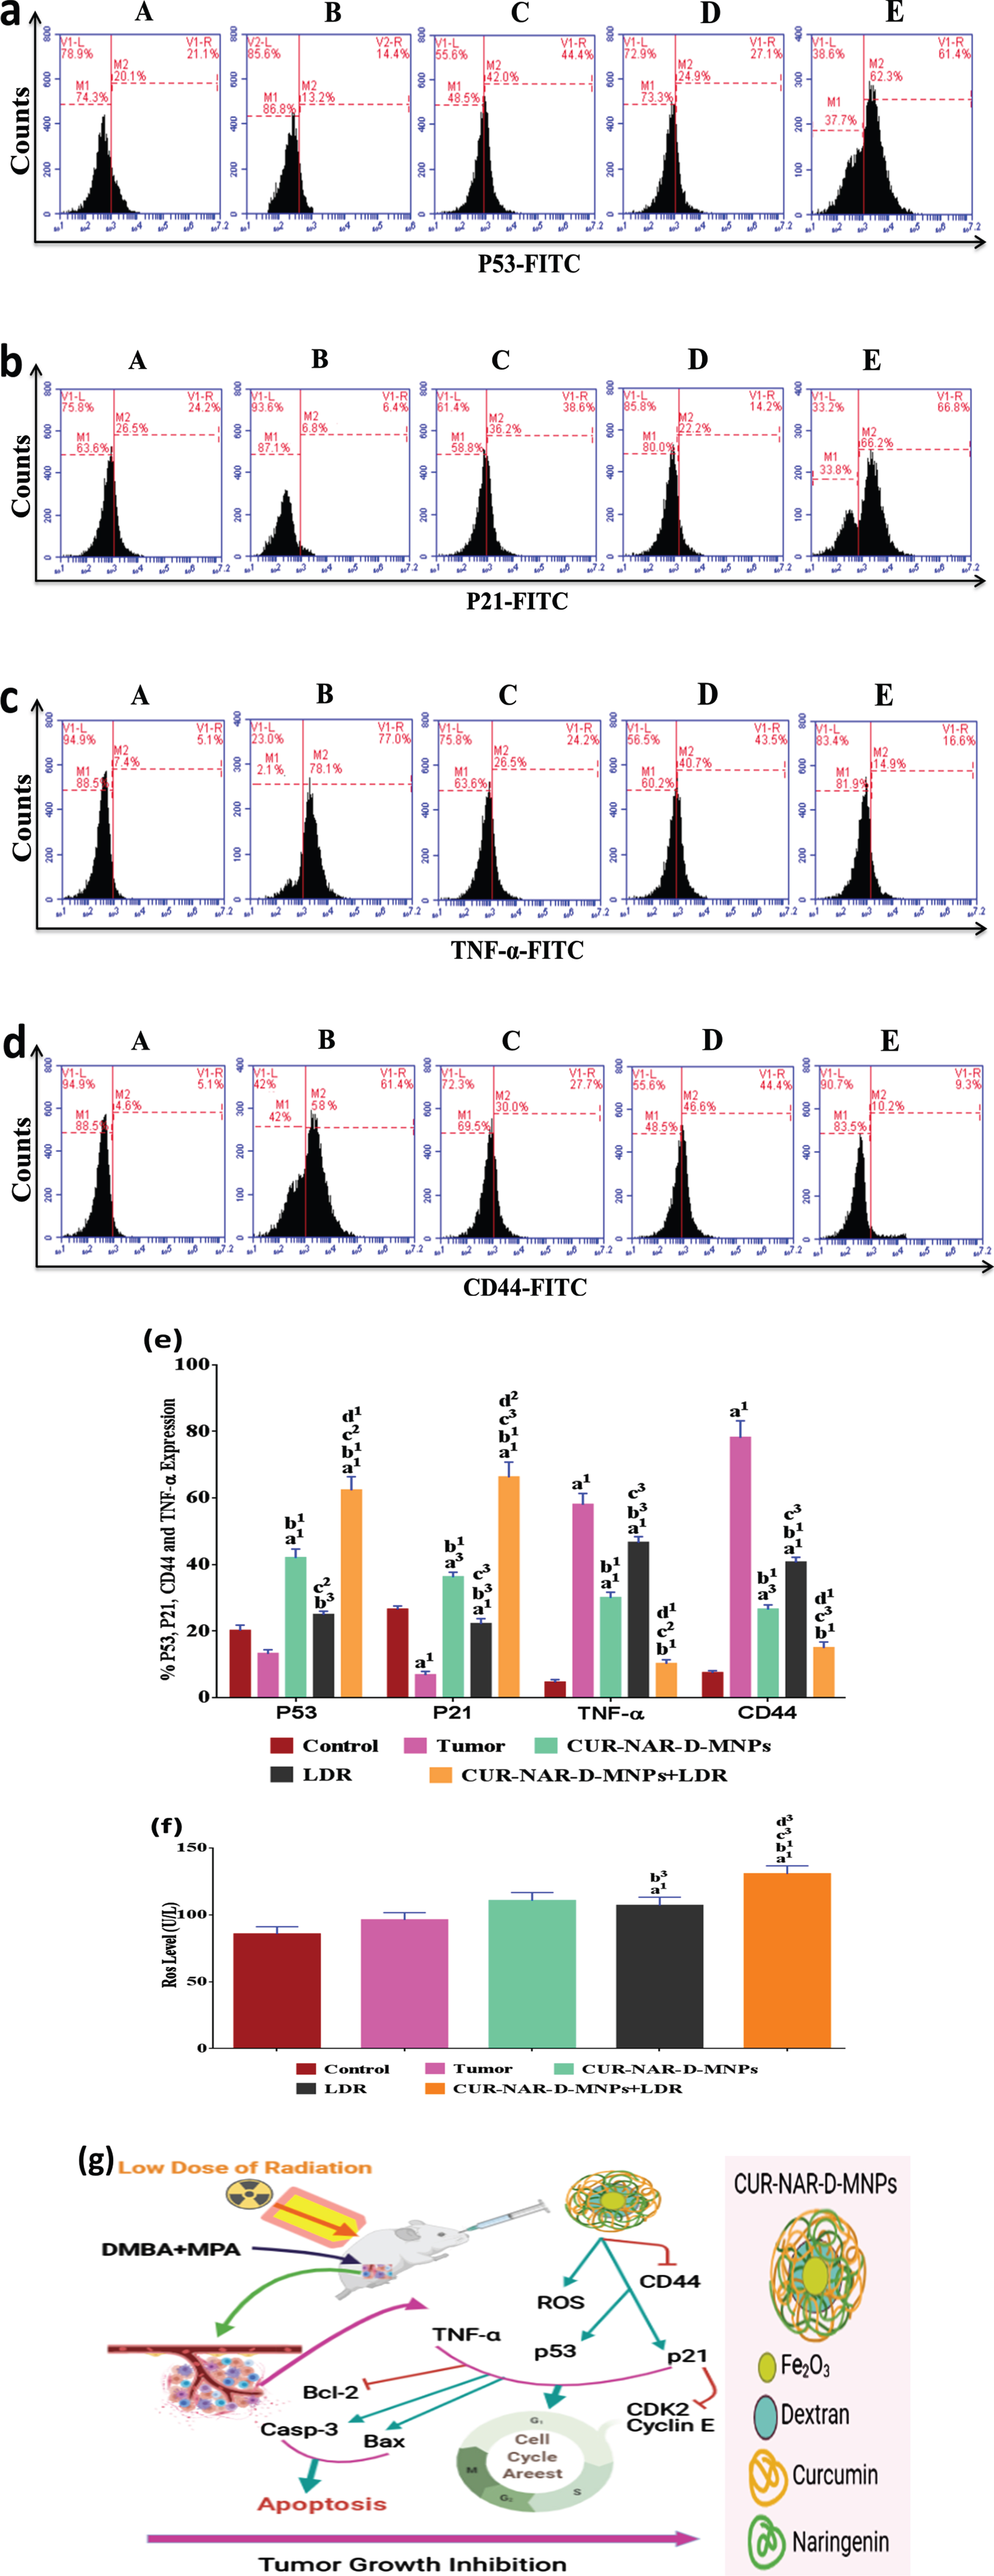 CUR-NAR-D-MNPs act as tumor suppressors and radiosenstizers in tumor bearing animals by modulation of p21, p53, TNF-α and ROS signal pathway. (a, b, d and c) Flow cytometric images of p21, p53, TNF-α and CD44 respectively, (e) bar chart of accumulated data of p21, p53, TNF-α and CD44, (f) bar chart of ROS level. A, B, C, D and E) represent control, Tumor, CUR-NAR-D-MNPs, LDR and combination groups, (g) Schematic diagram representing the mode of action of CUR-NAR-D-MNPs/ or LDRTreatment with CUR-NAR-D-MNPs/ or LDR finally induce tumor suppressor by cell cycle arrest and apoptosis induction through P53, P21, TNF-α,CD44 and ROS pathway. (→) Indicates direction of pathway and (raisebox . 9pt --⊣) indicates blocking function. The results presented as the mean±SEM, n = 5. a1p < 0.001, a2p < 0.01, a3p < 0.05 vs. control; b1p < 0.001, b2p < 0.01, b3p < 0.05 vs. Tumor group; c1p < 0.001, c2p < 0.01, c3p < 0.05 vs. CUR-NAR-D-MNPs group, d1p < 0.001, d2p < 0.01, d3p < 0.05 vs. LDR.